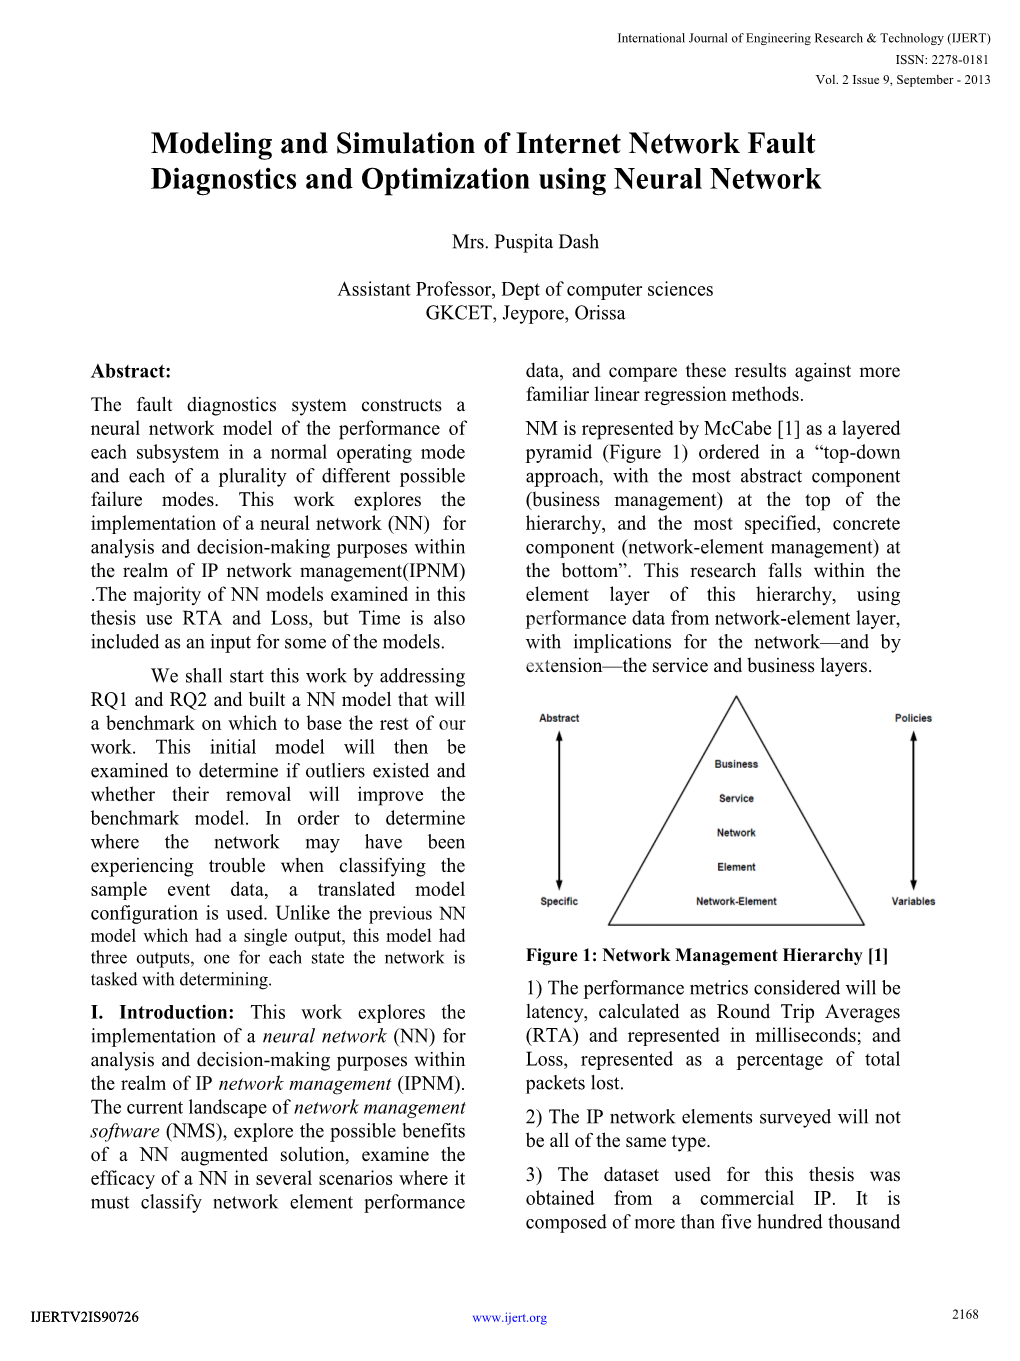 Modeling and Simulation of Internet Network Fault Diagnostics and Optimization Using Neural Network